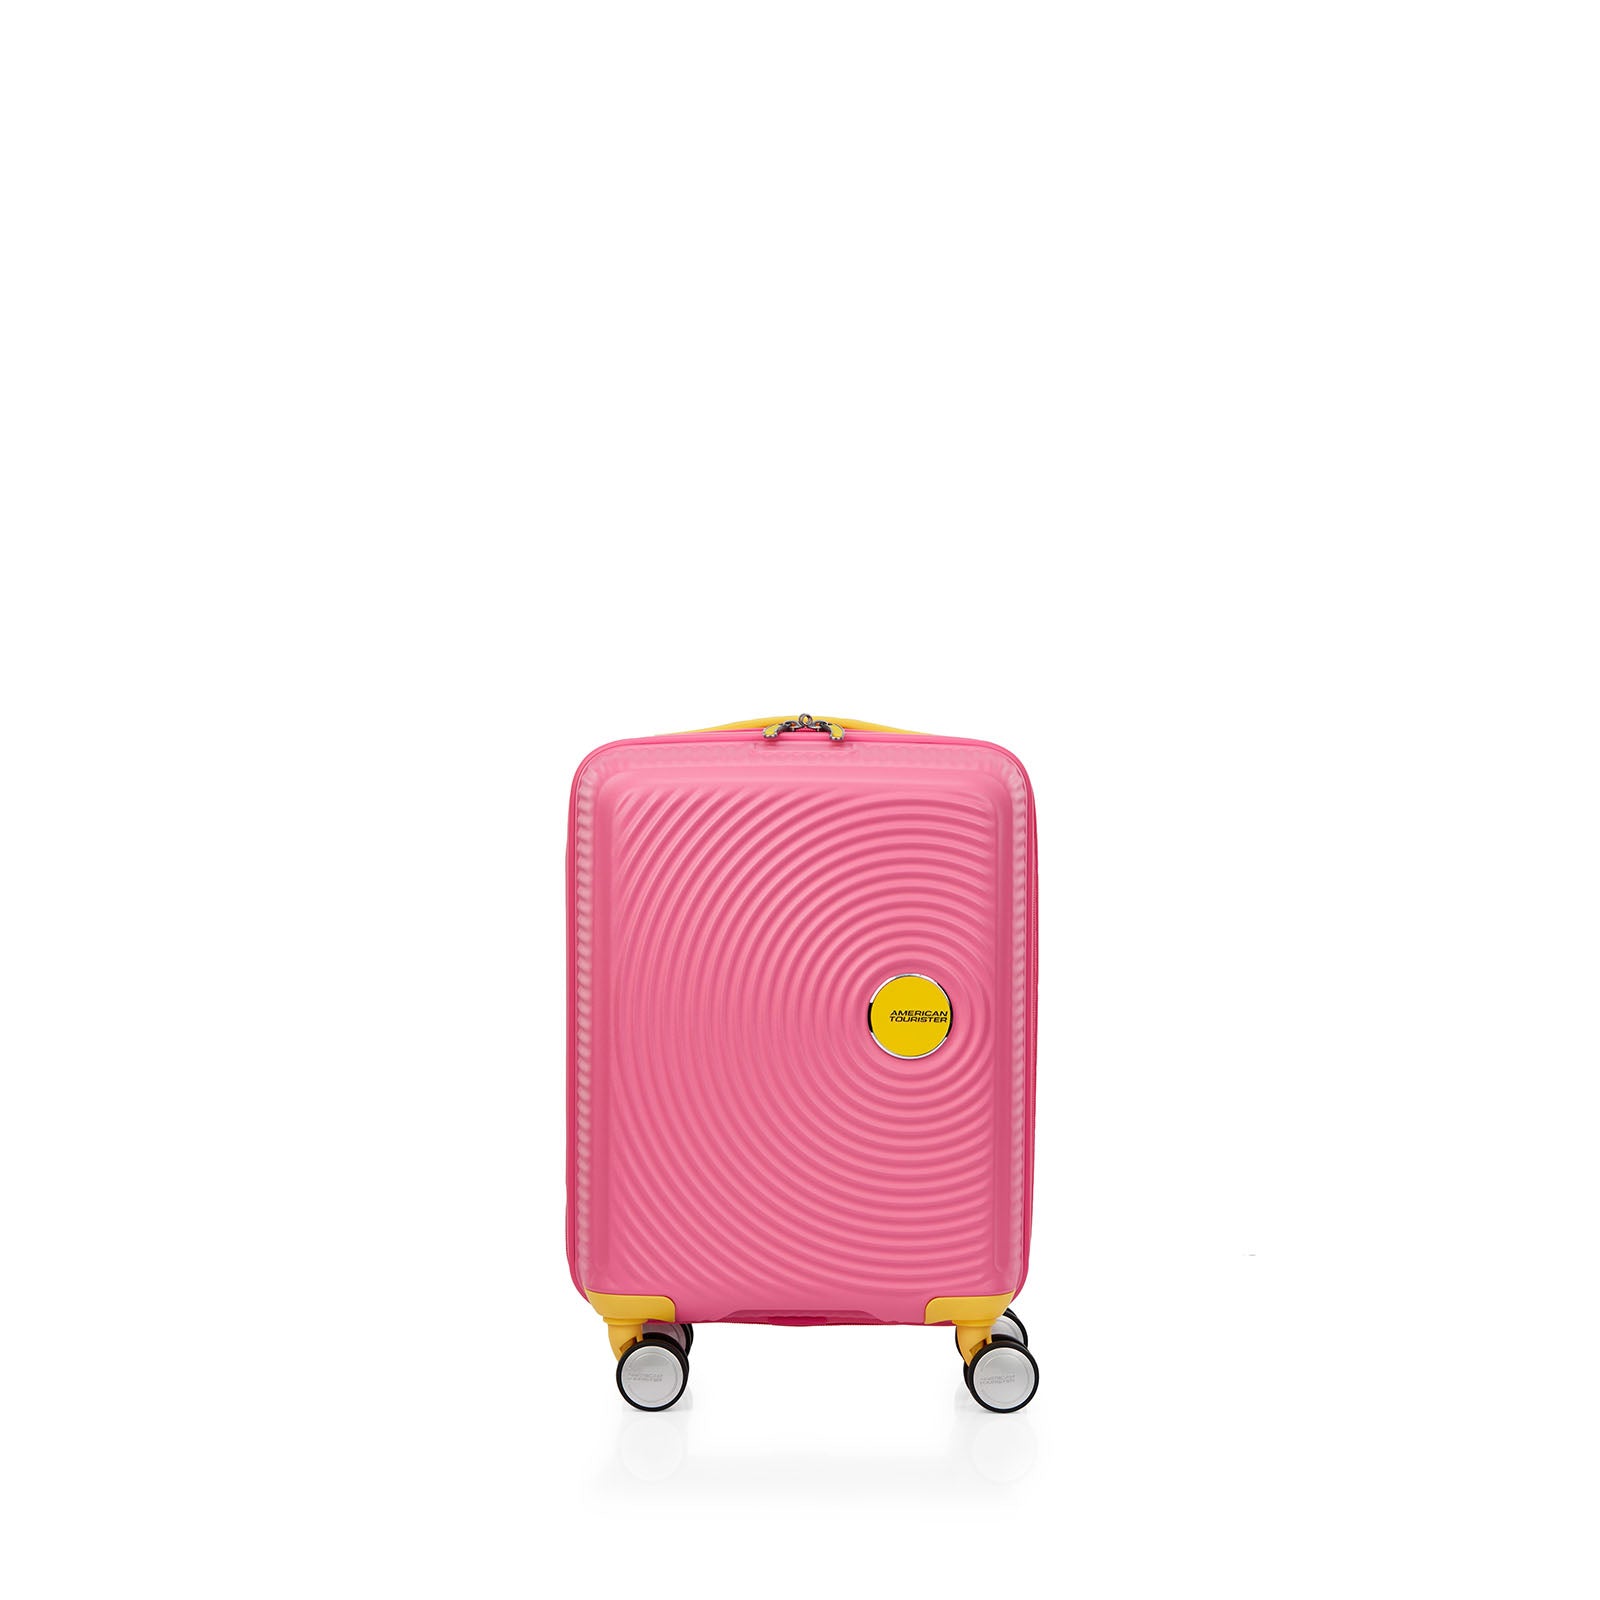 American-Tourister-Little-Curio-47cm-Carry-On-Suitcase-Pink-Yellow-Front